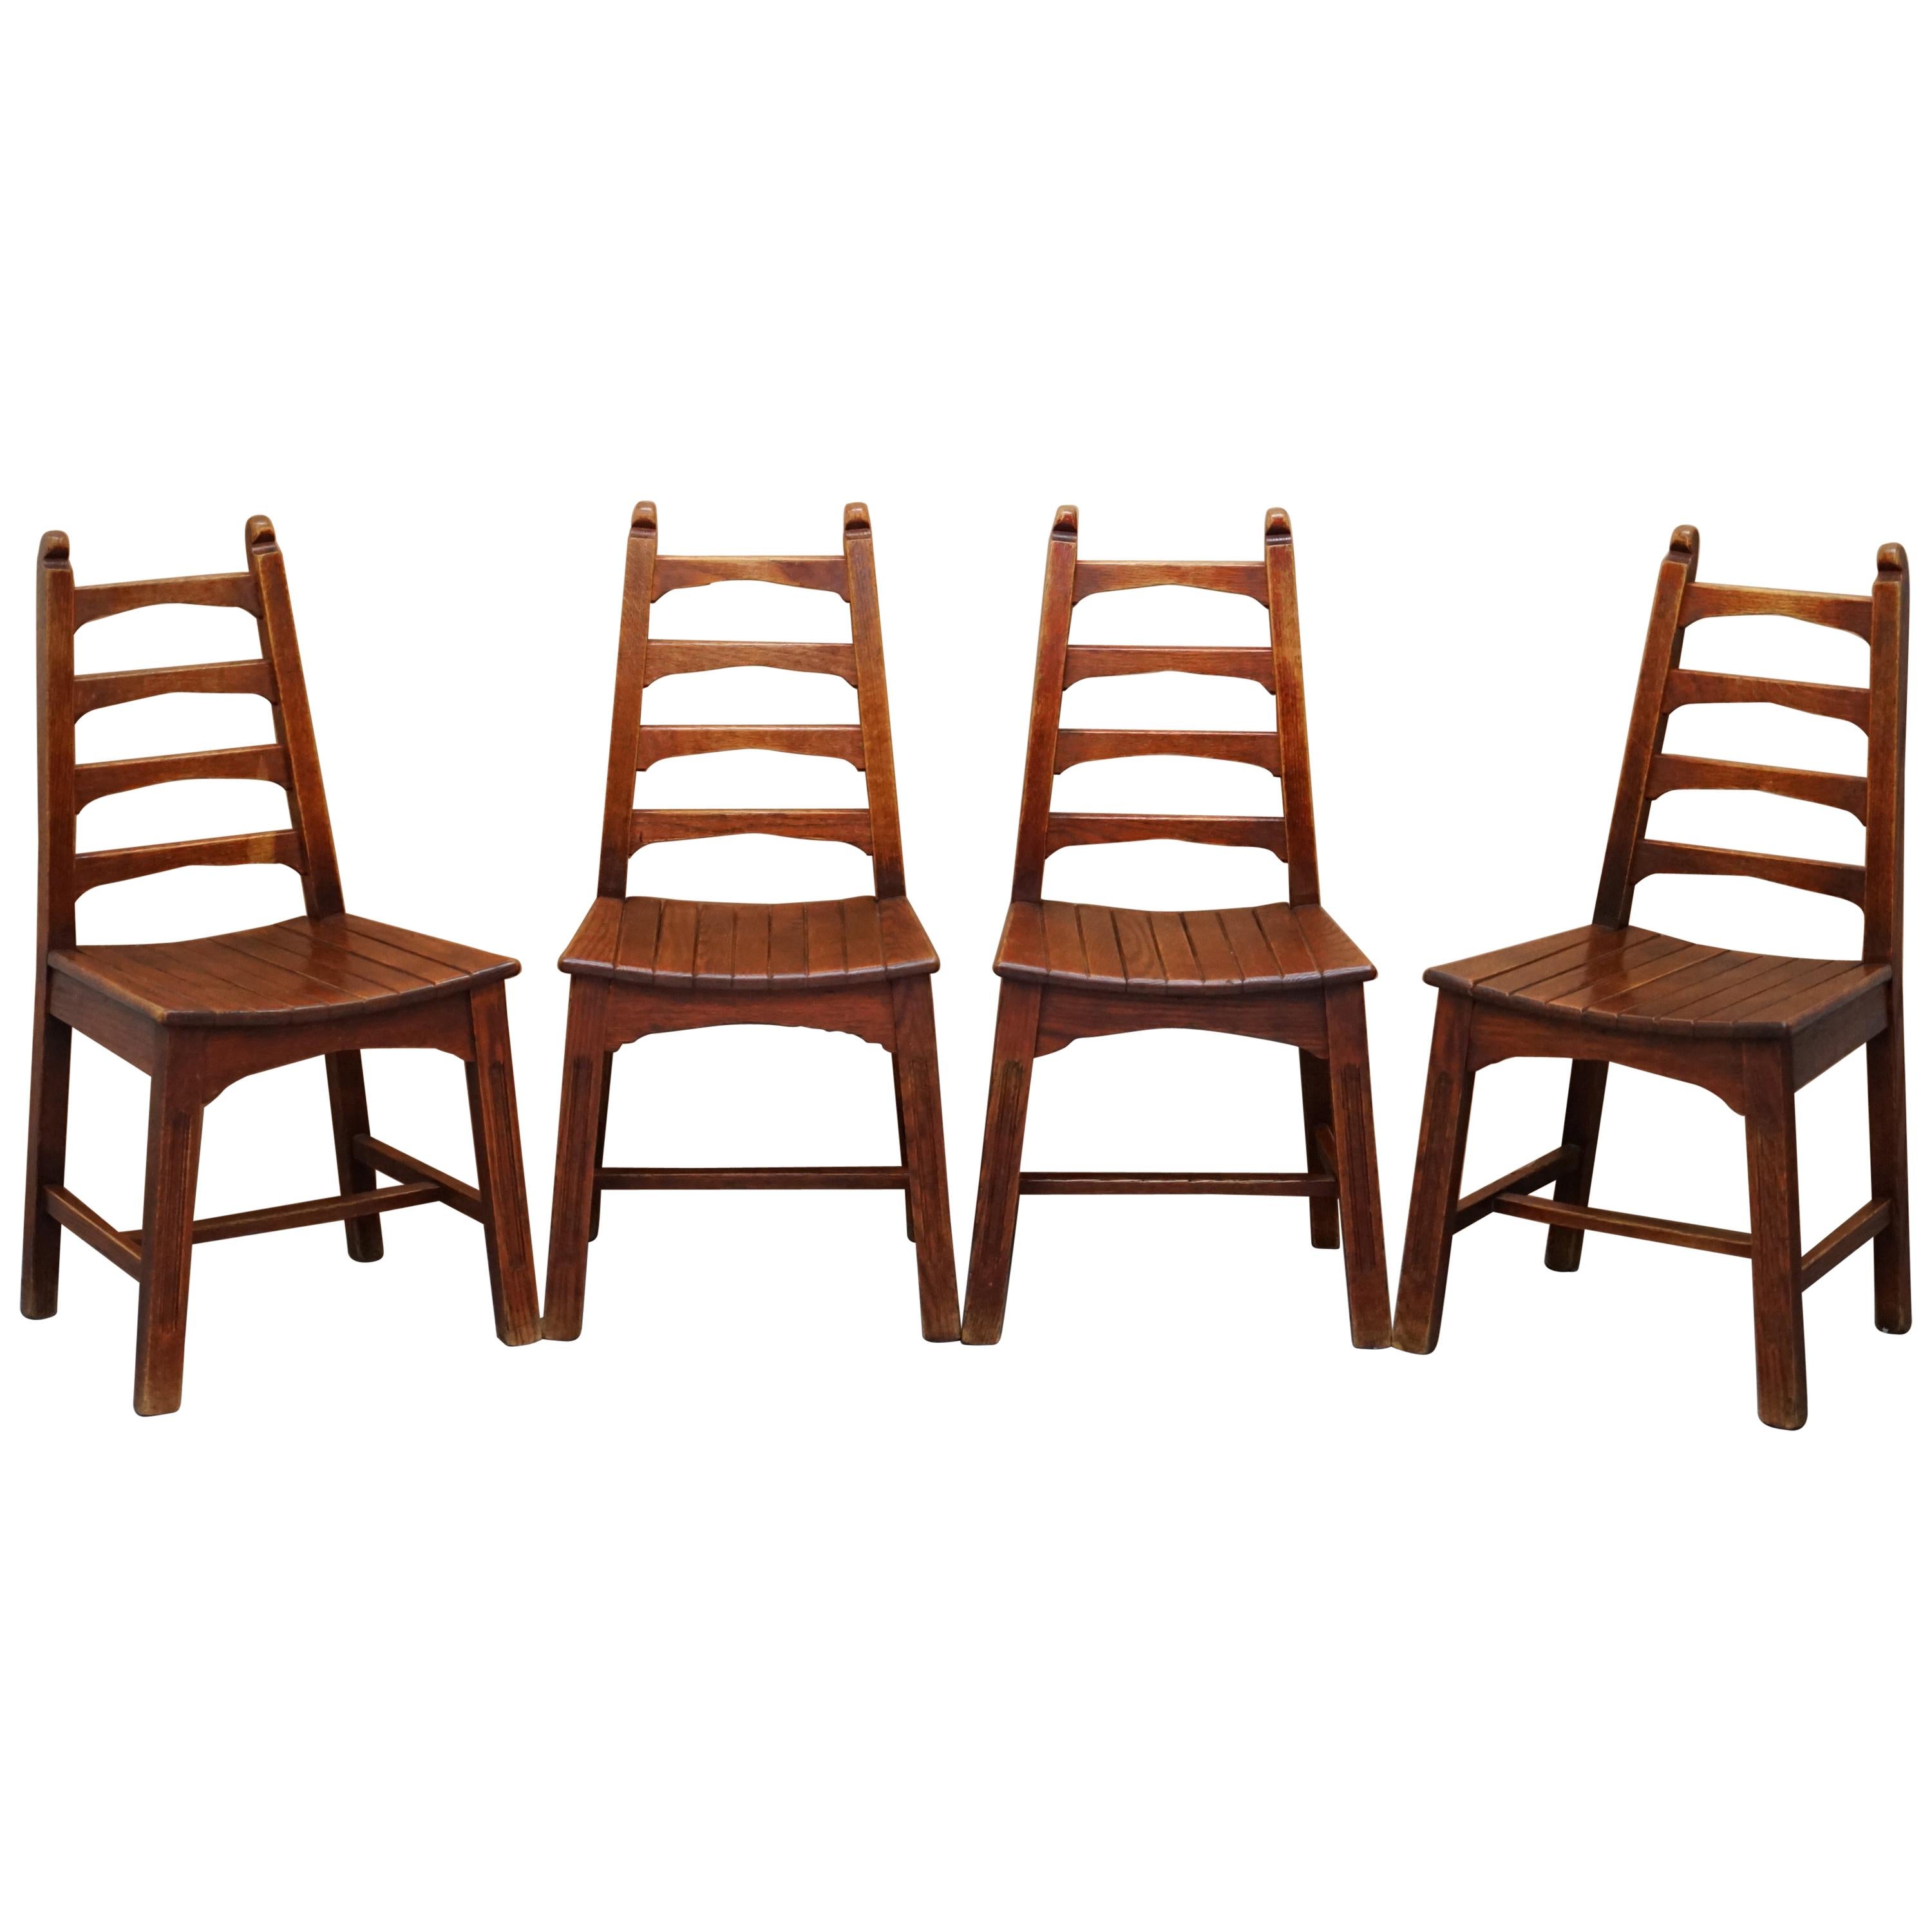 Set of Four Stylish Mid-Century Modern Red Oak Dining Chairs Nice Sculptural